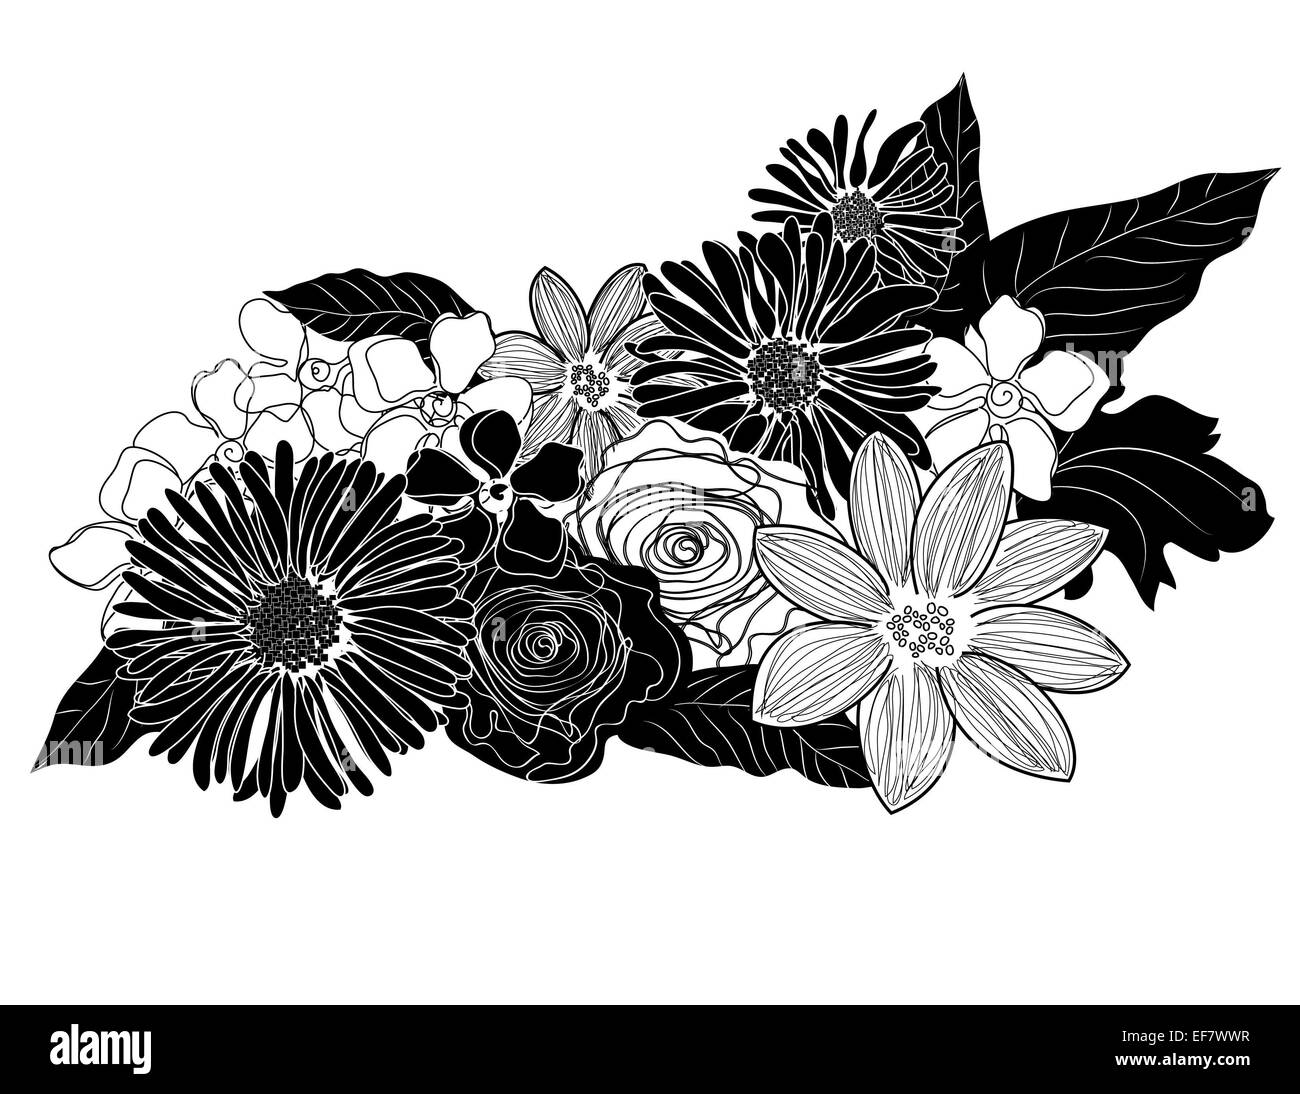 Delicate black and white illustration of a floral arrangement for decoration and romantic motifs Stock Photo